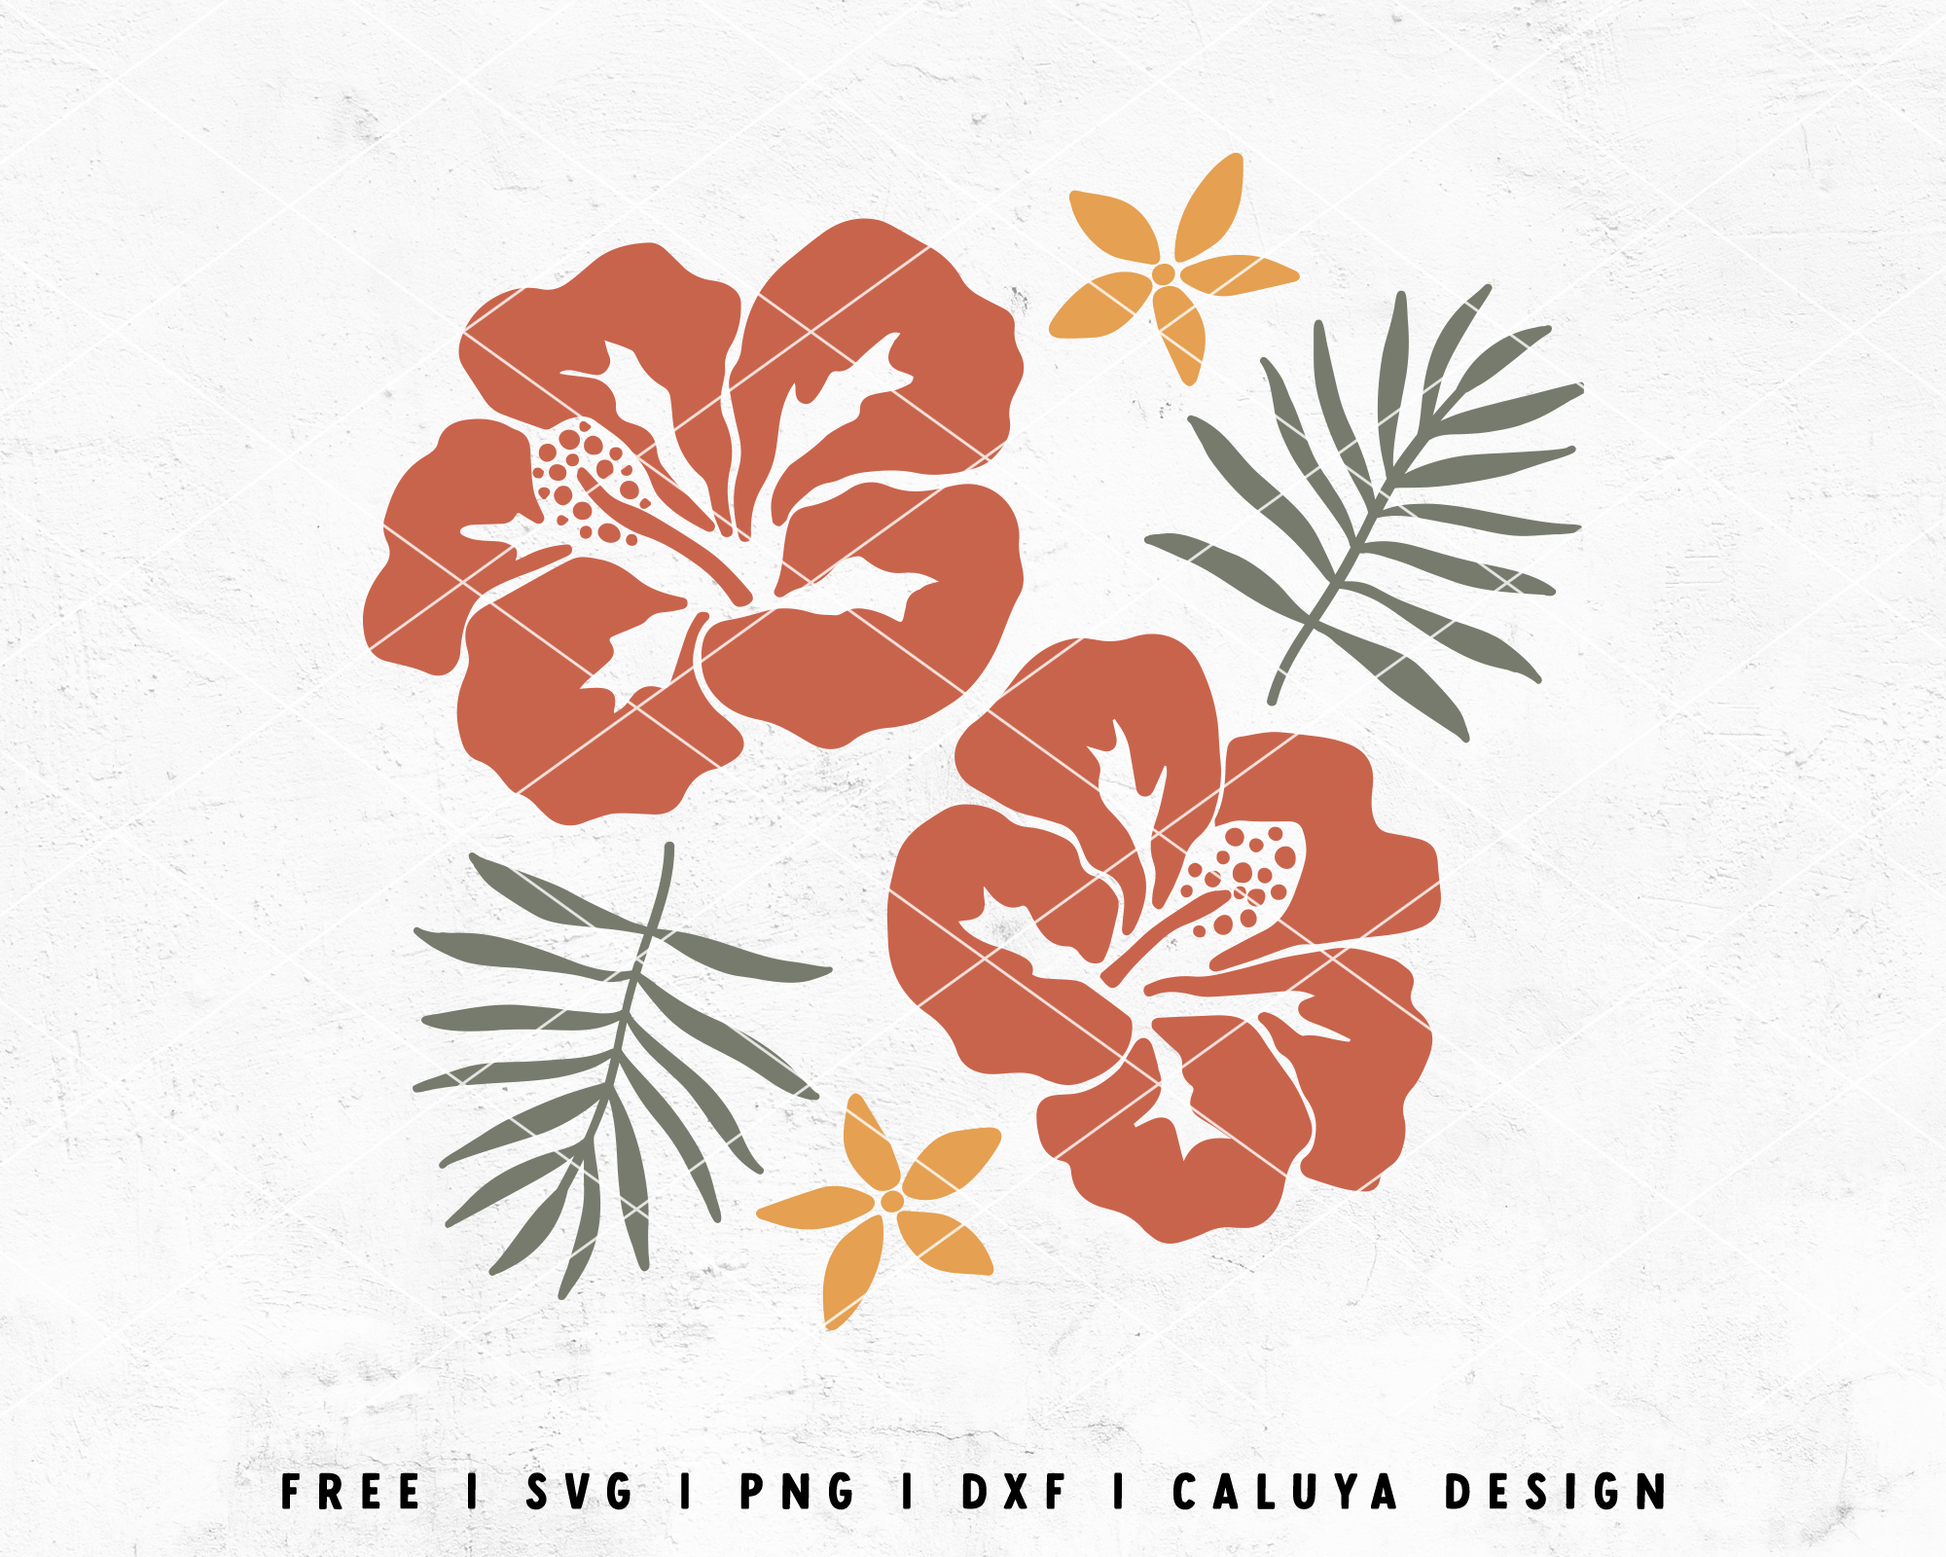 FREE Hibiscus SVG | Tropical Flower SVG | Hawaii SVG Cut File for Cricut, Cameo Silhouette | Free SVG Cut File